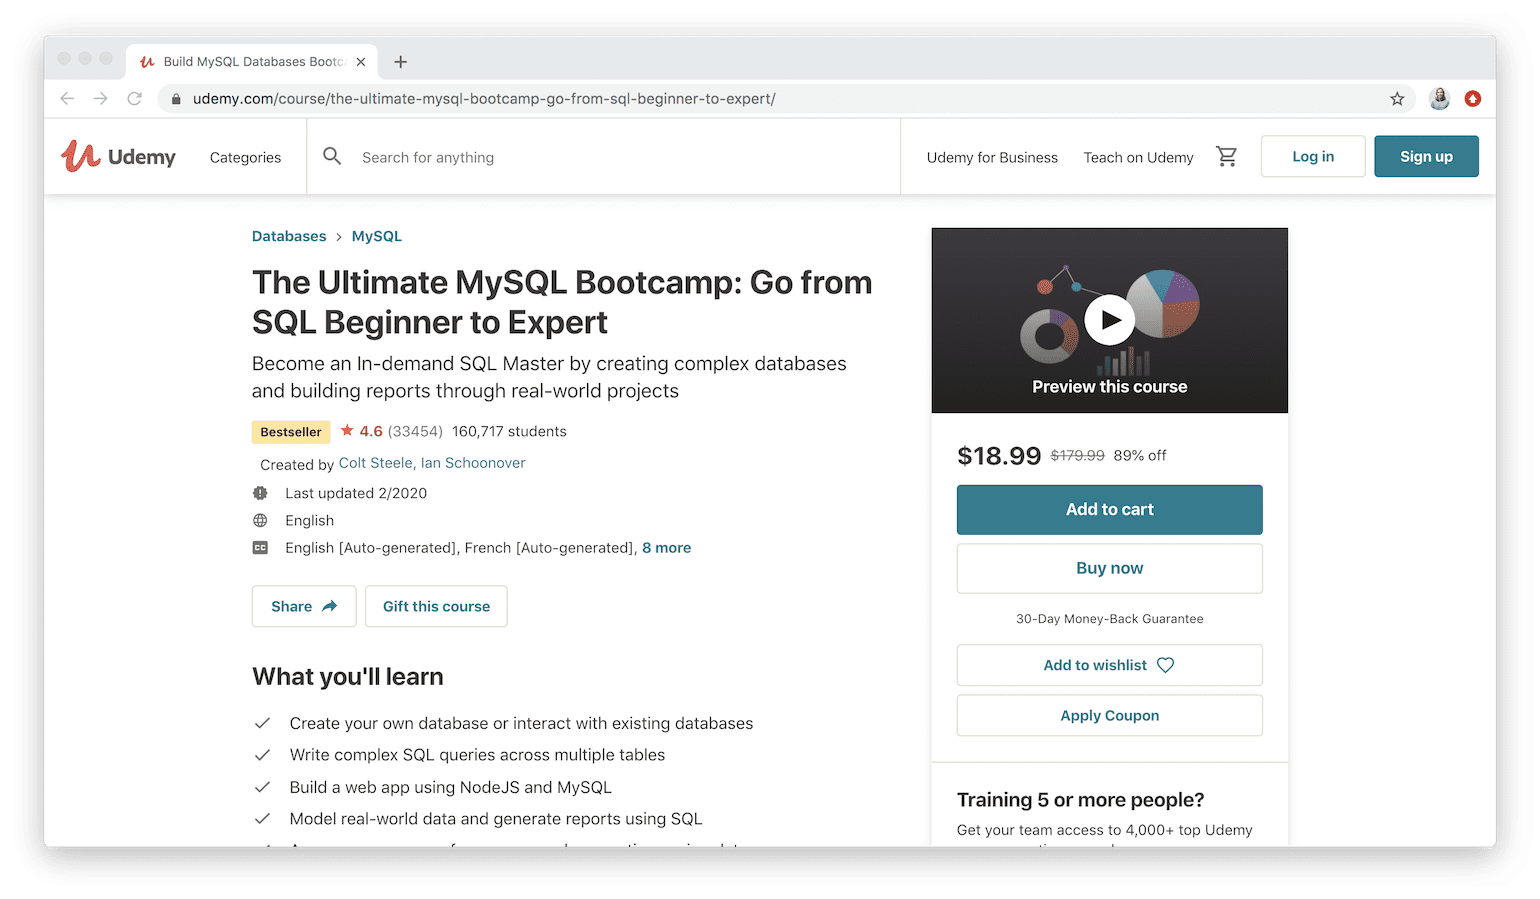 The Ultimate MySQL Bootcamp: Go From SQL Beginner to Expert on Udemy